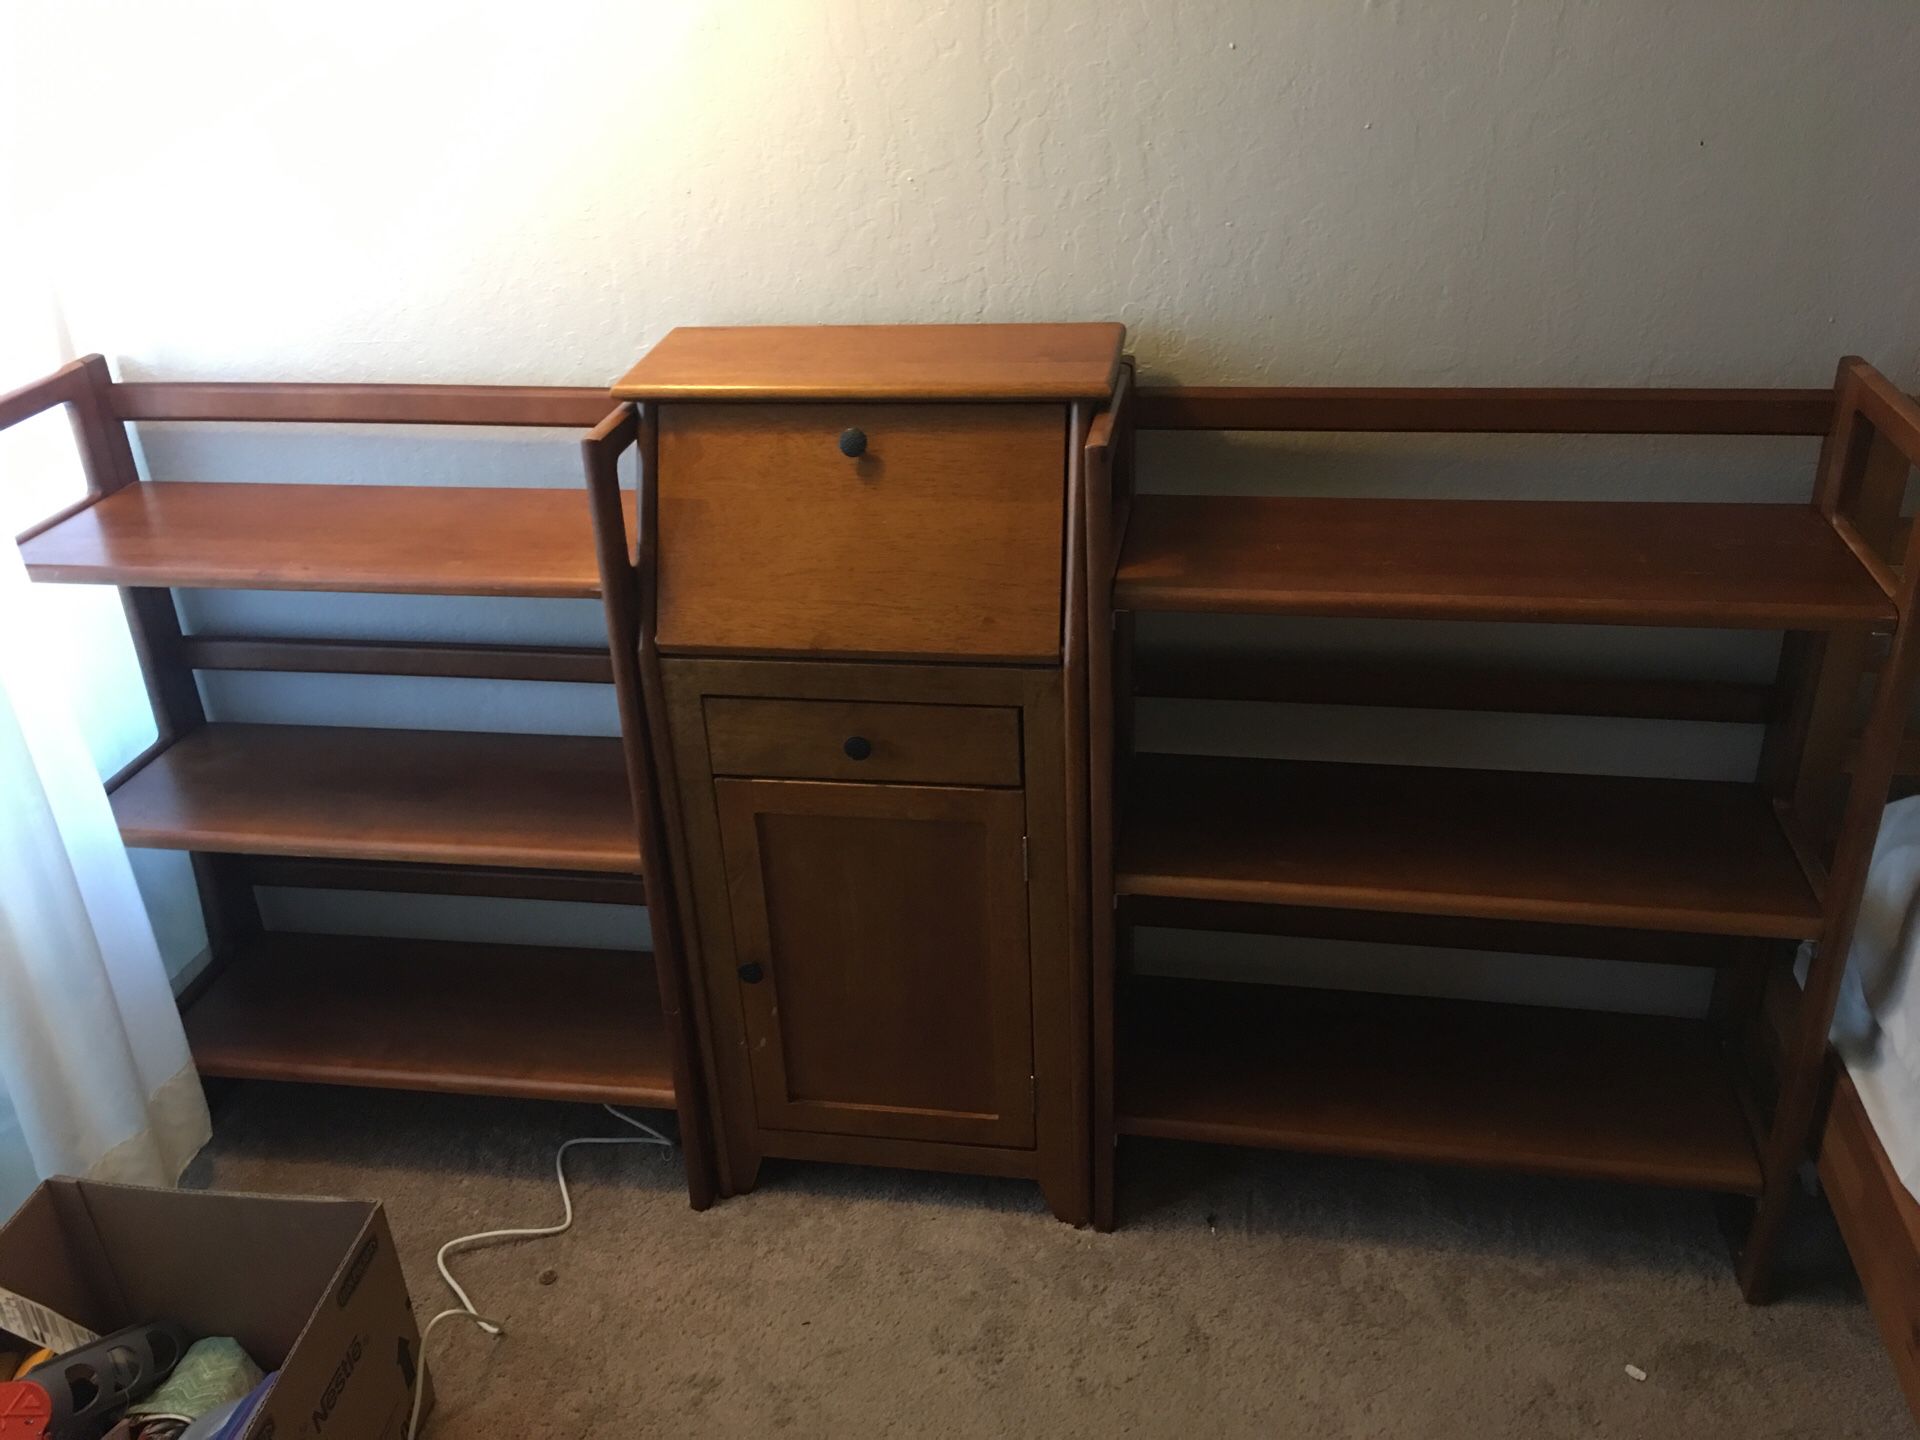 Small fold out desk/hutch with matching foldable bookcases